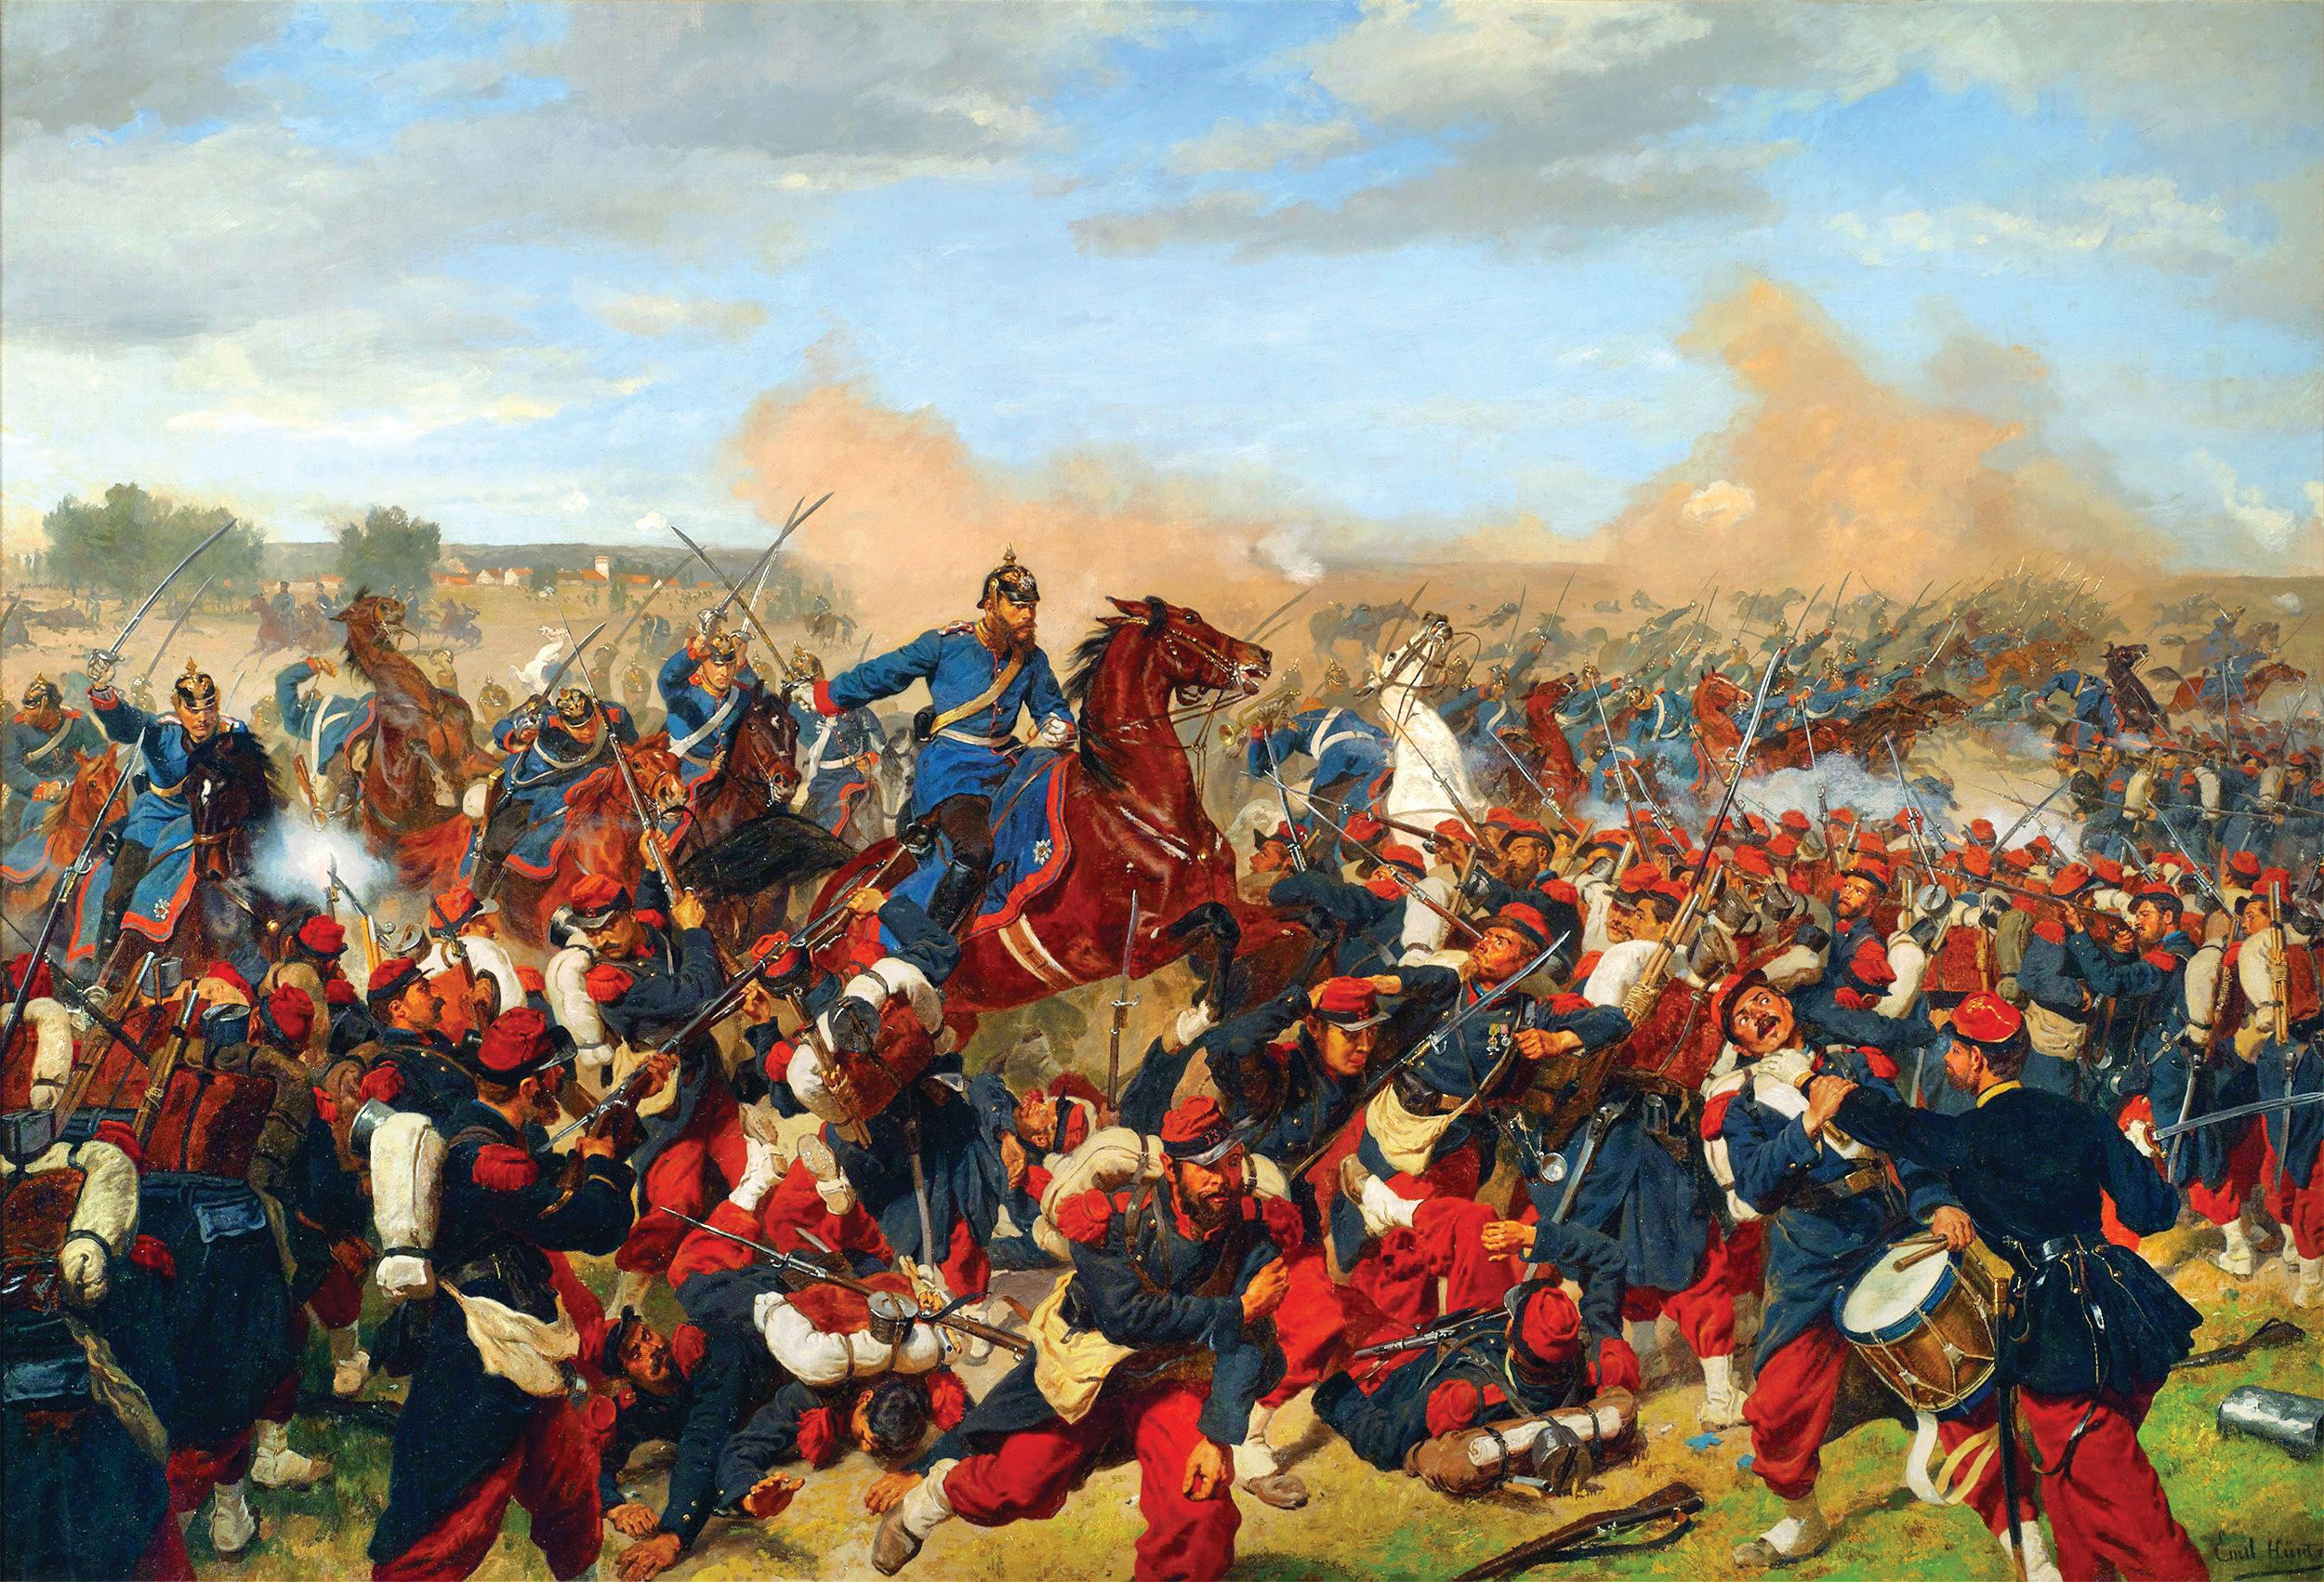 Prussian Guard Dragoons charge the French in the engagement at Mars-la-Tour. The French failed to realize they outnumbered the Prussians four to one.